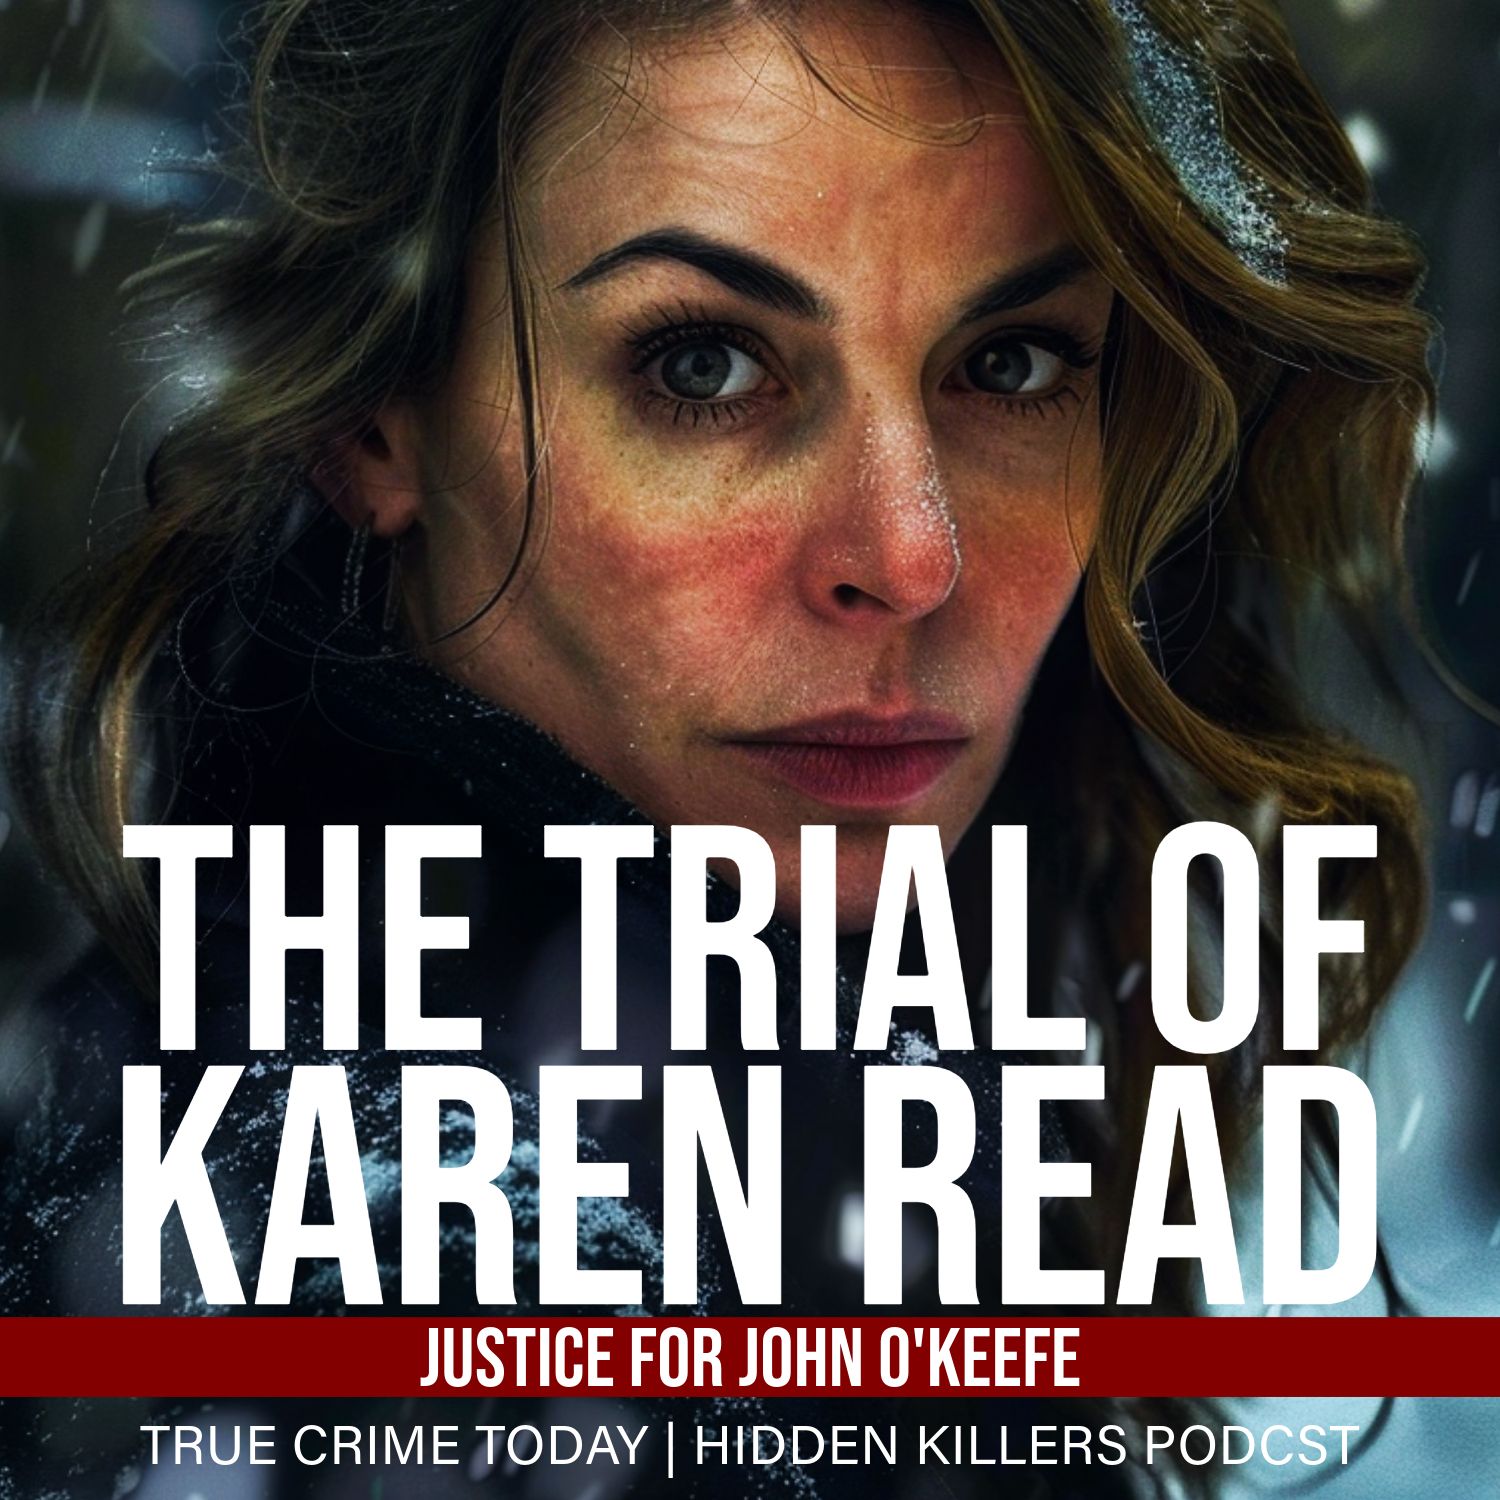 Why Is The Trial Of Karen Read So Confusing? -WEEK IN REVIEW